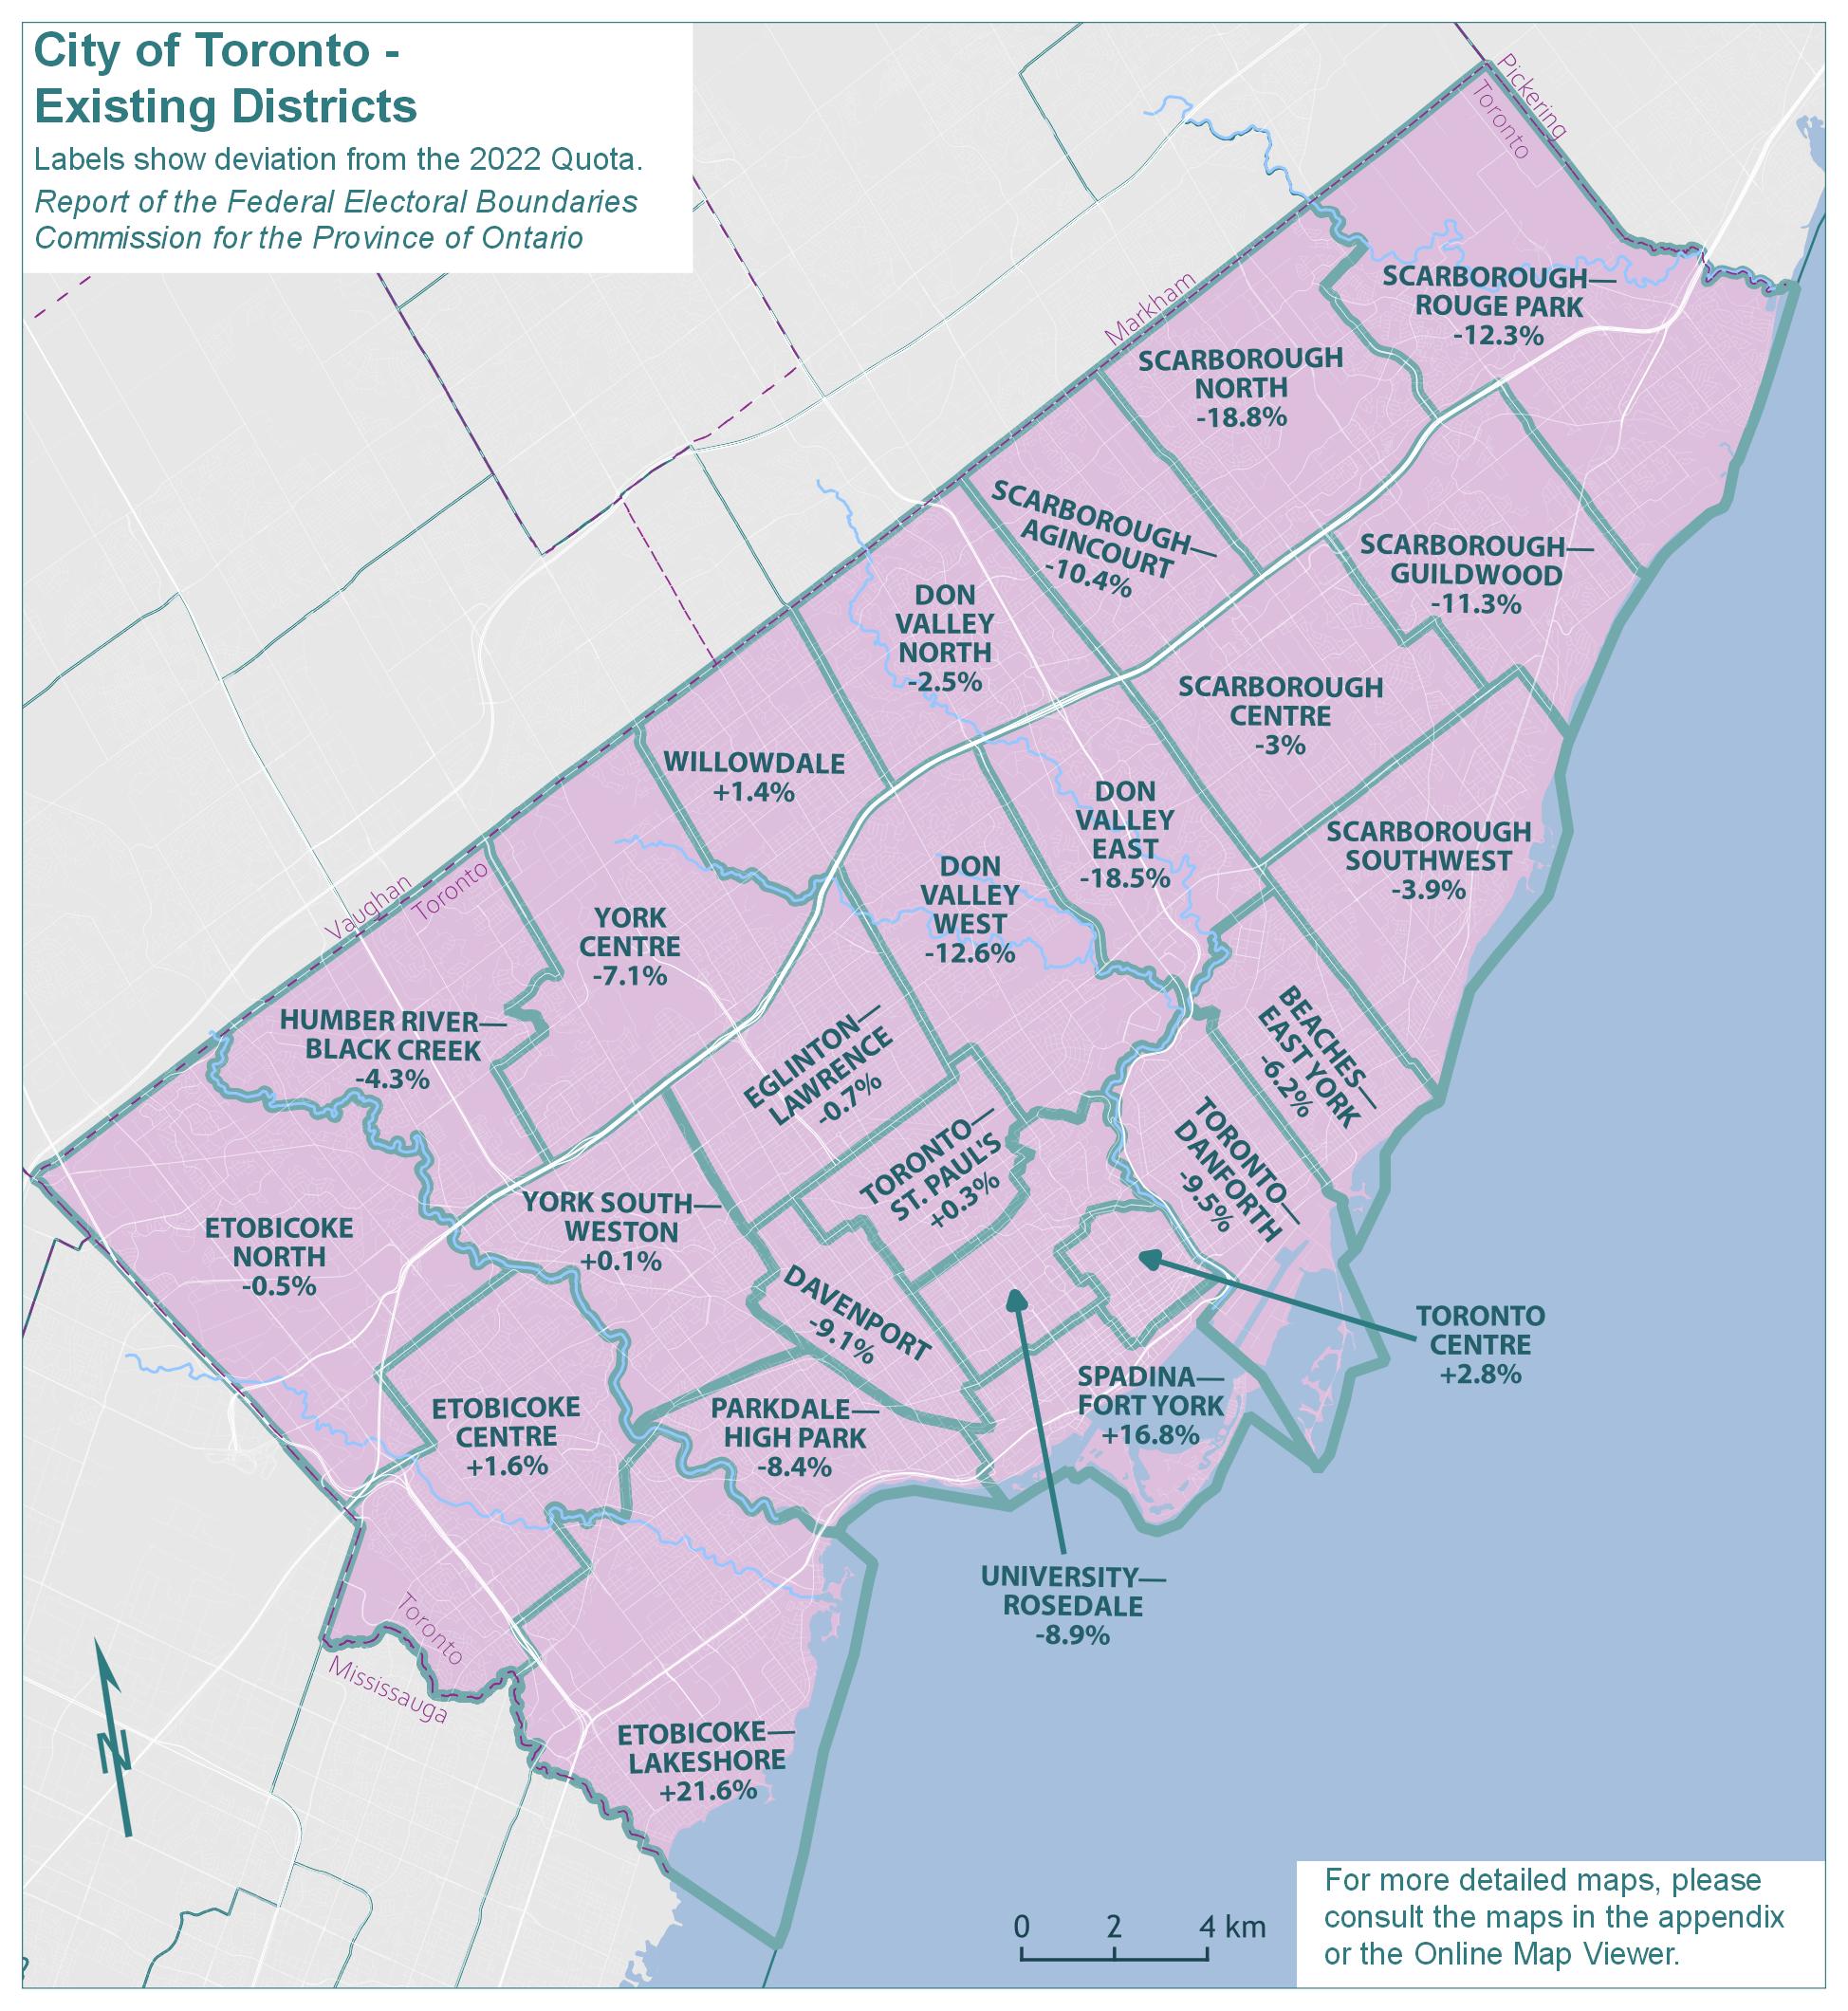 City of Toronto - Existing Districts